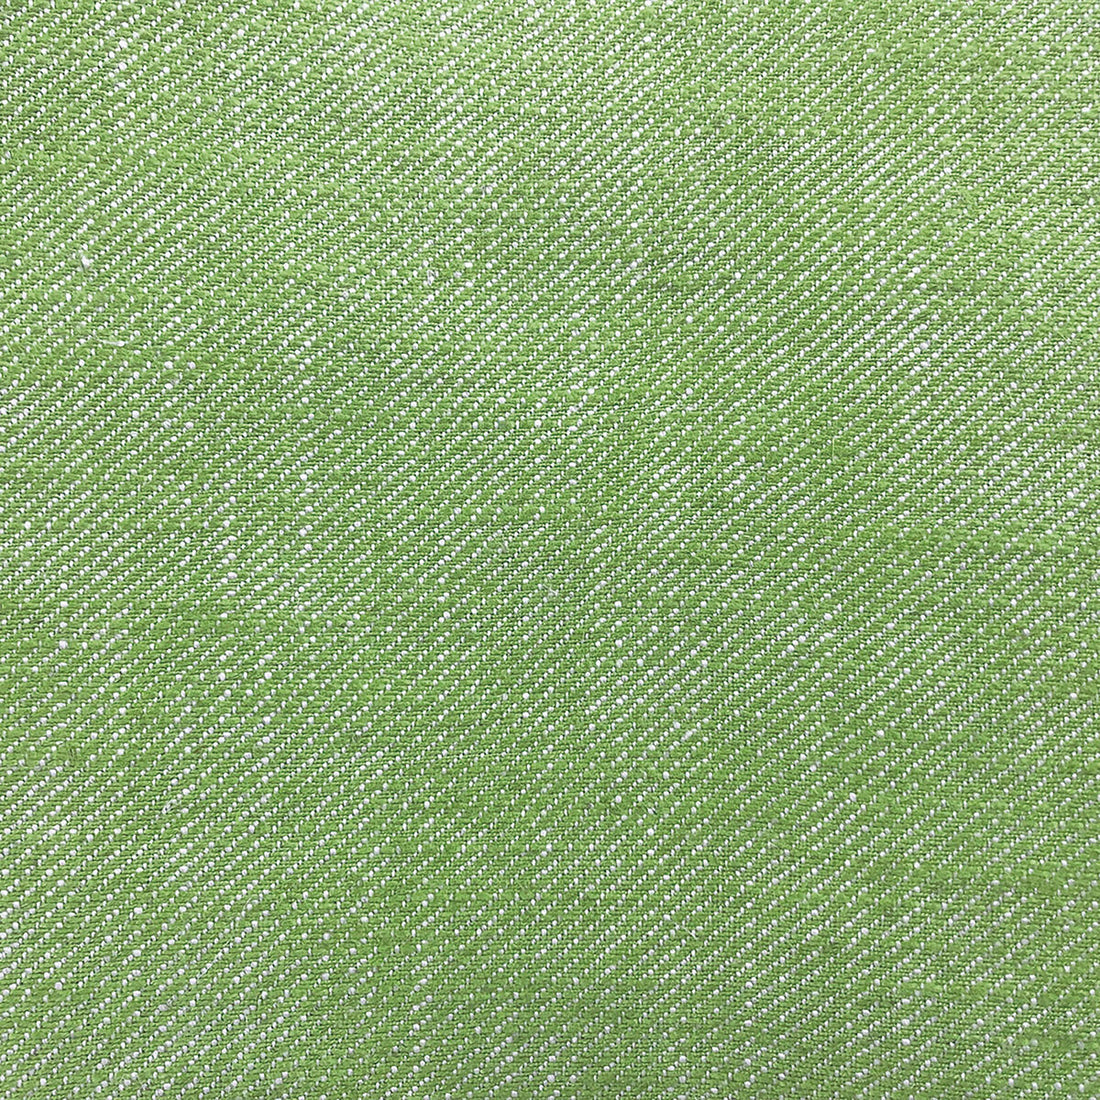 Hisa fabric in verde claro color - pattern GDT5639.018.0 - by Gaston y Daniela in the Gaston Japon collection